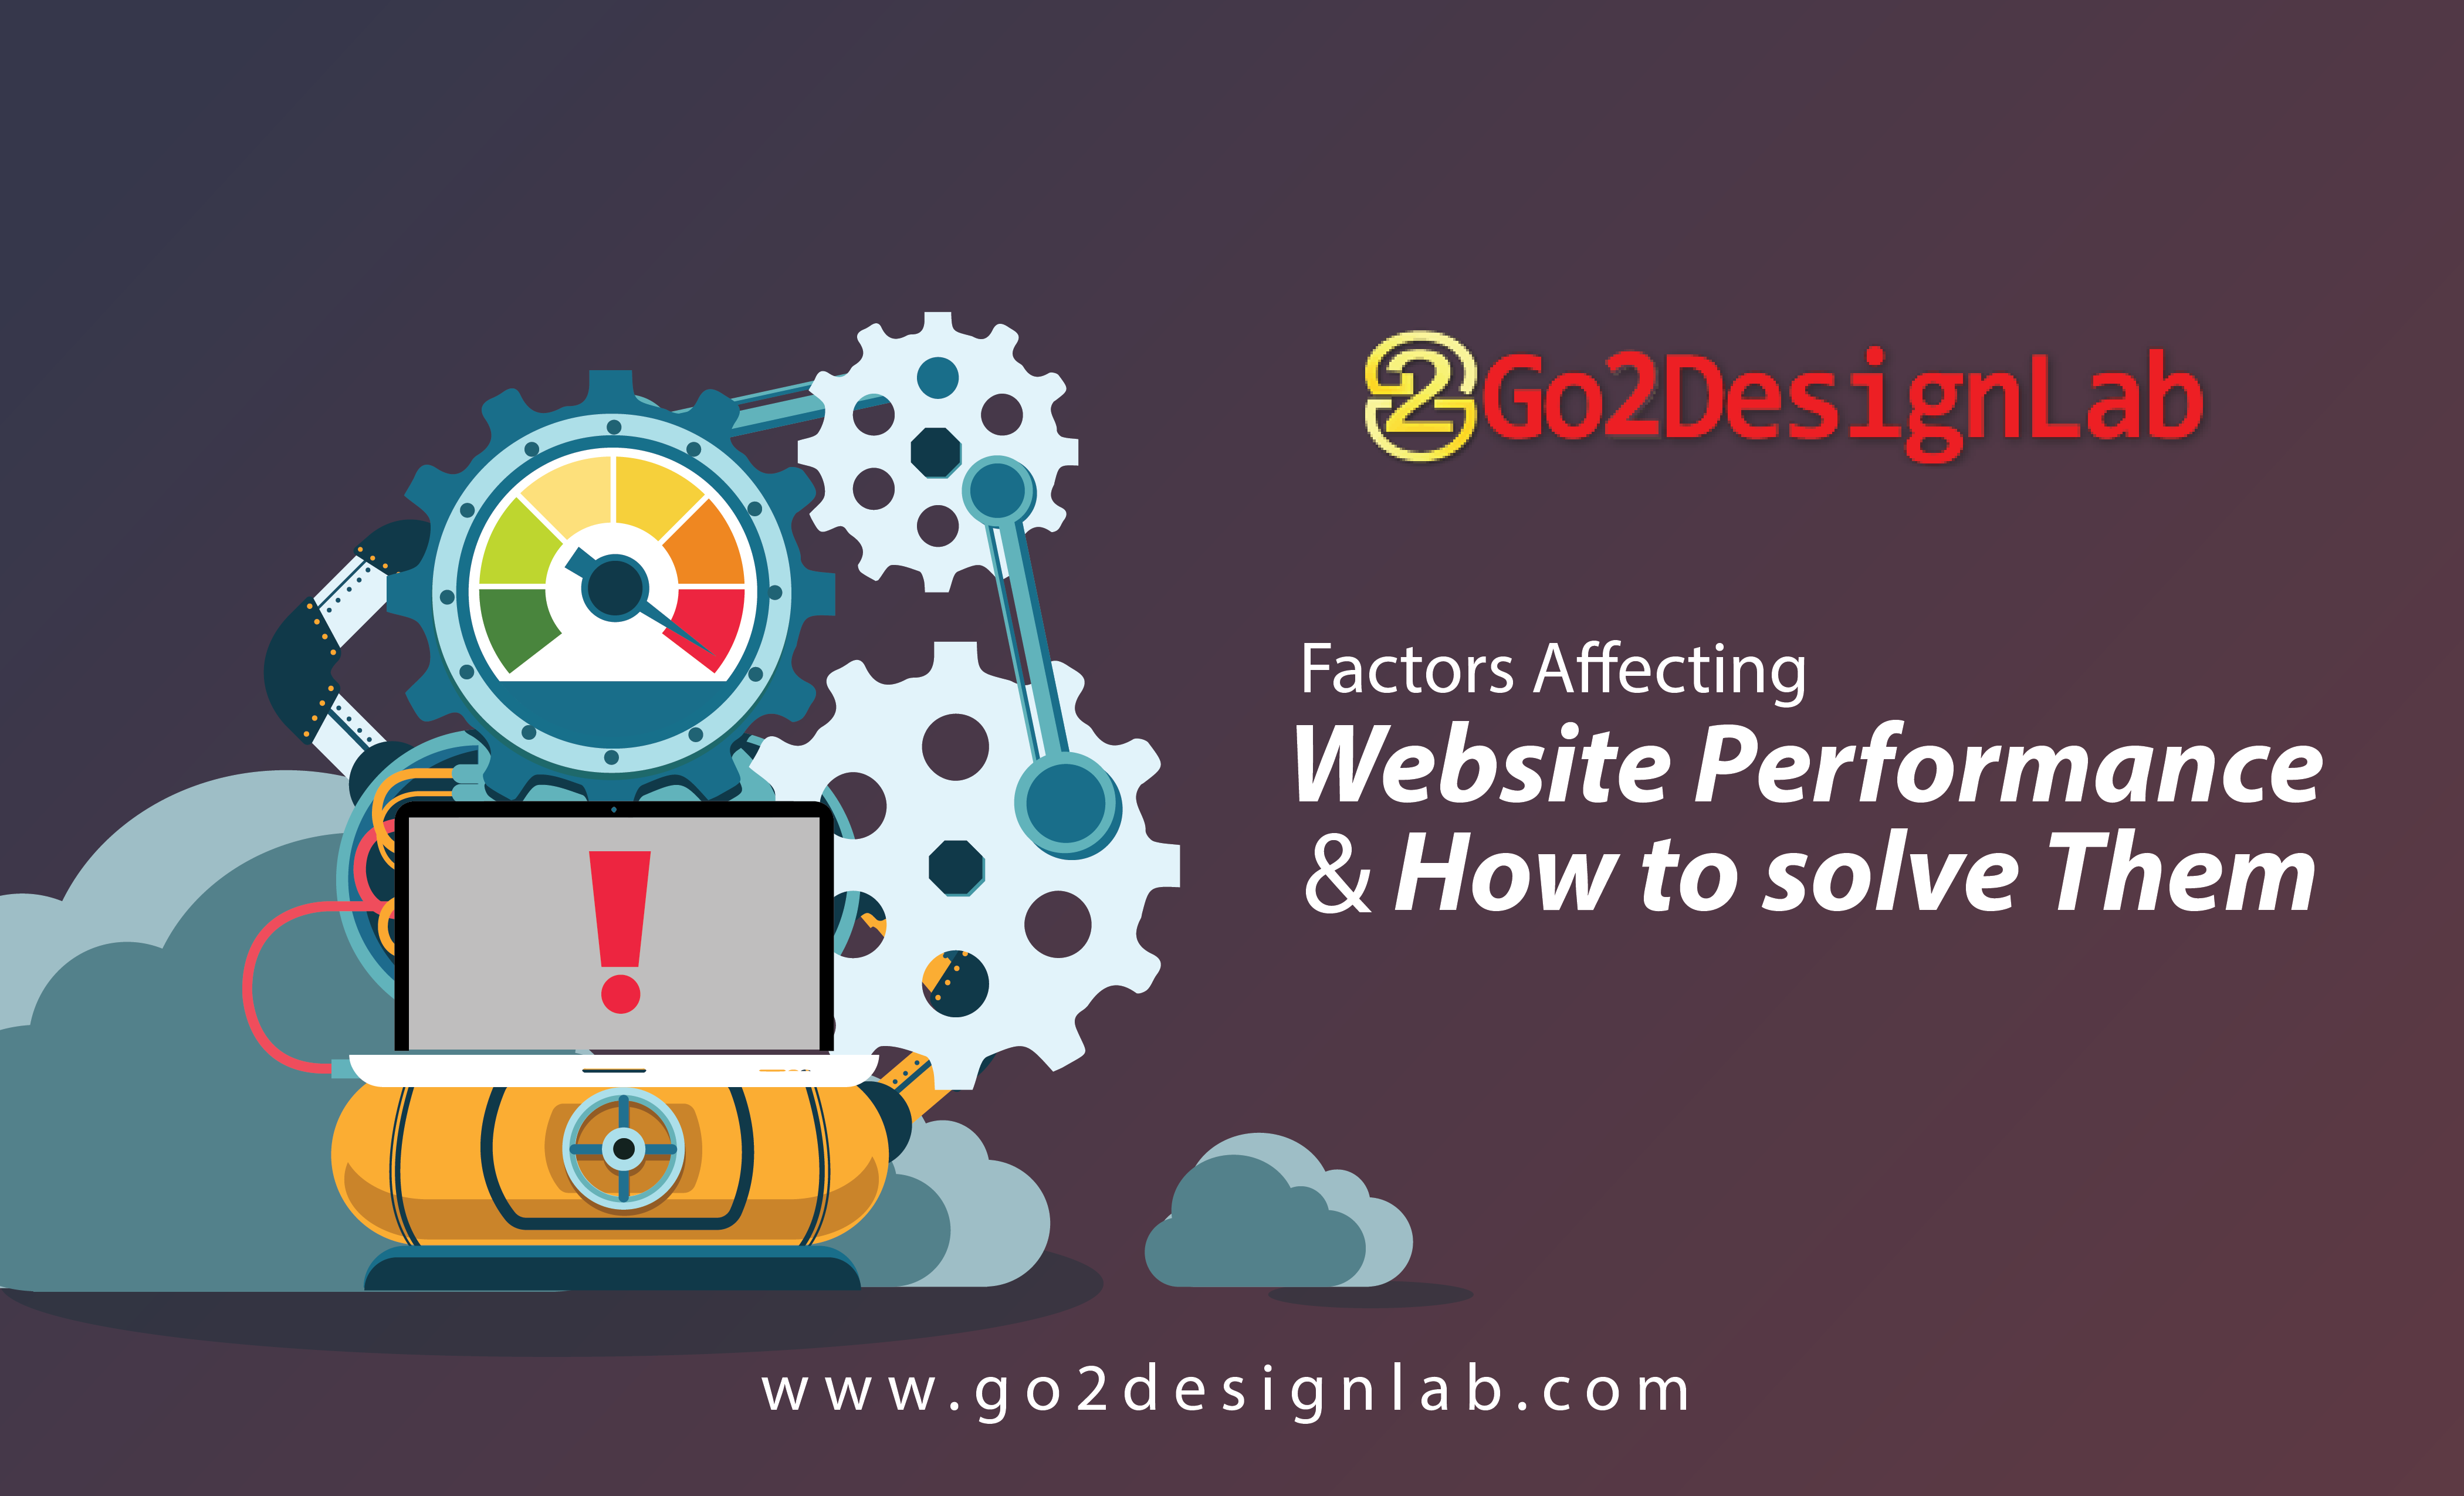 Factors Affecting Website Performance & How to solve Them